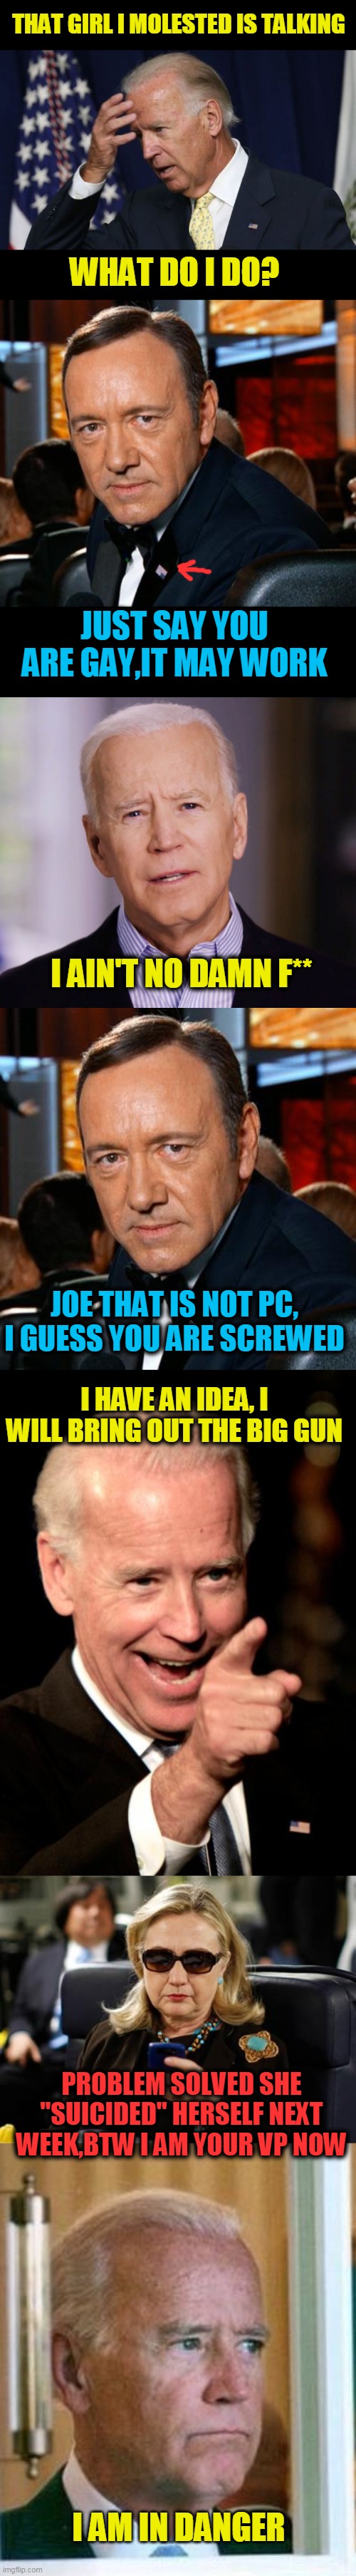 joe is in danger | THAT GIRL I MOLESTED IS TALKING; WHAT DO I DO? JUST SAY YOU ARE GAY,IT MAY WORK; I AIN'T NO DAMN F**; JOE THAT IS NOT PC, I GUESS YOU ARE SCREWED; I HAVE AN IDEA, I WILL BRING OUT THE BIG GUN; PROBLEM SOLVED SHE "SUICIDED" HERSELF NEXT WEEK,BTW I AM YOUR VP NOW; I AM IN DANGER | image tagged in memes,smilin biden,hillary clinton cellphone,kevin spacey,sad joe biden,joe biden worries | made w/ Imgflip meme maker